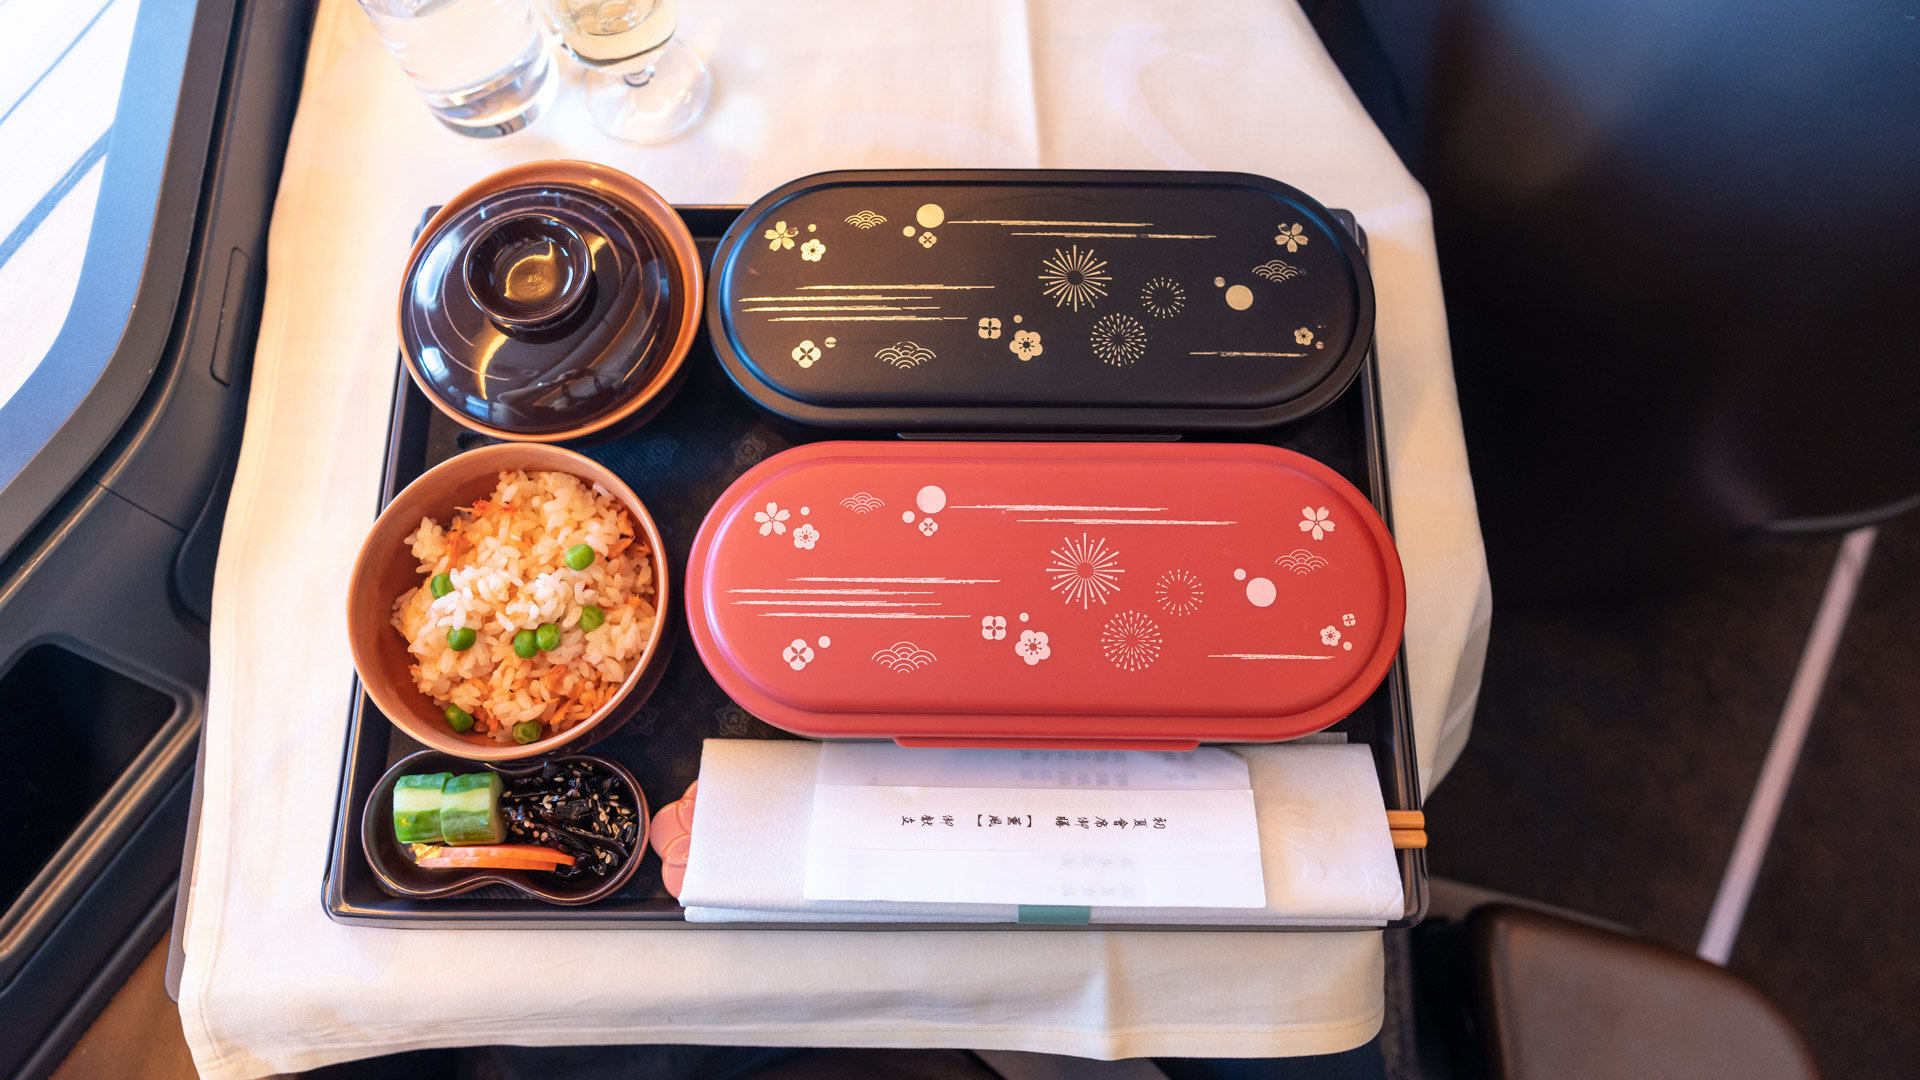 China Airlines Boeing 777 Business Class Japanese meal presentation.